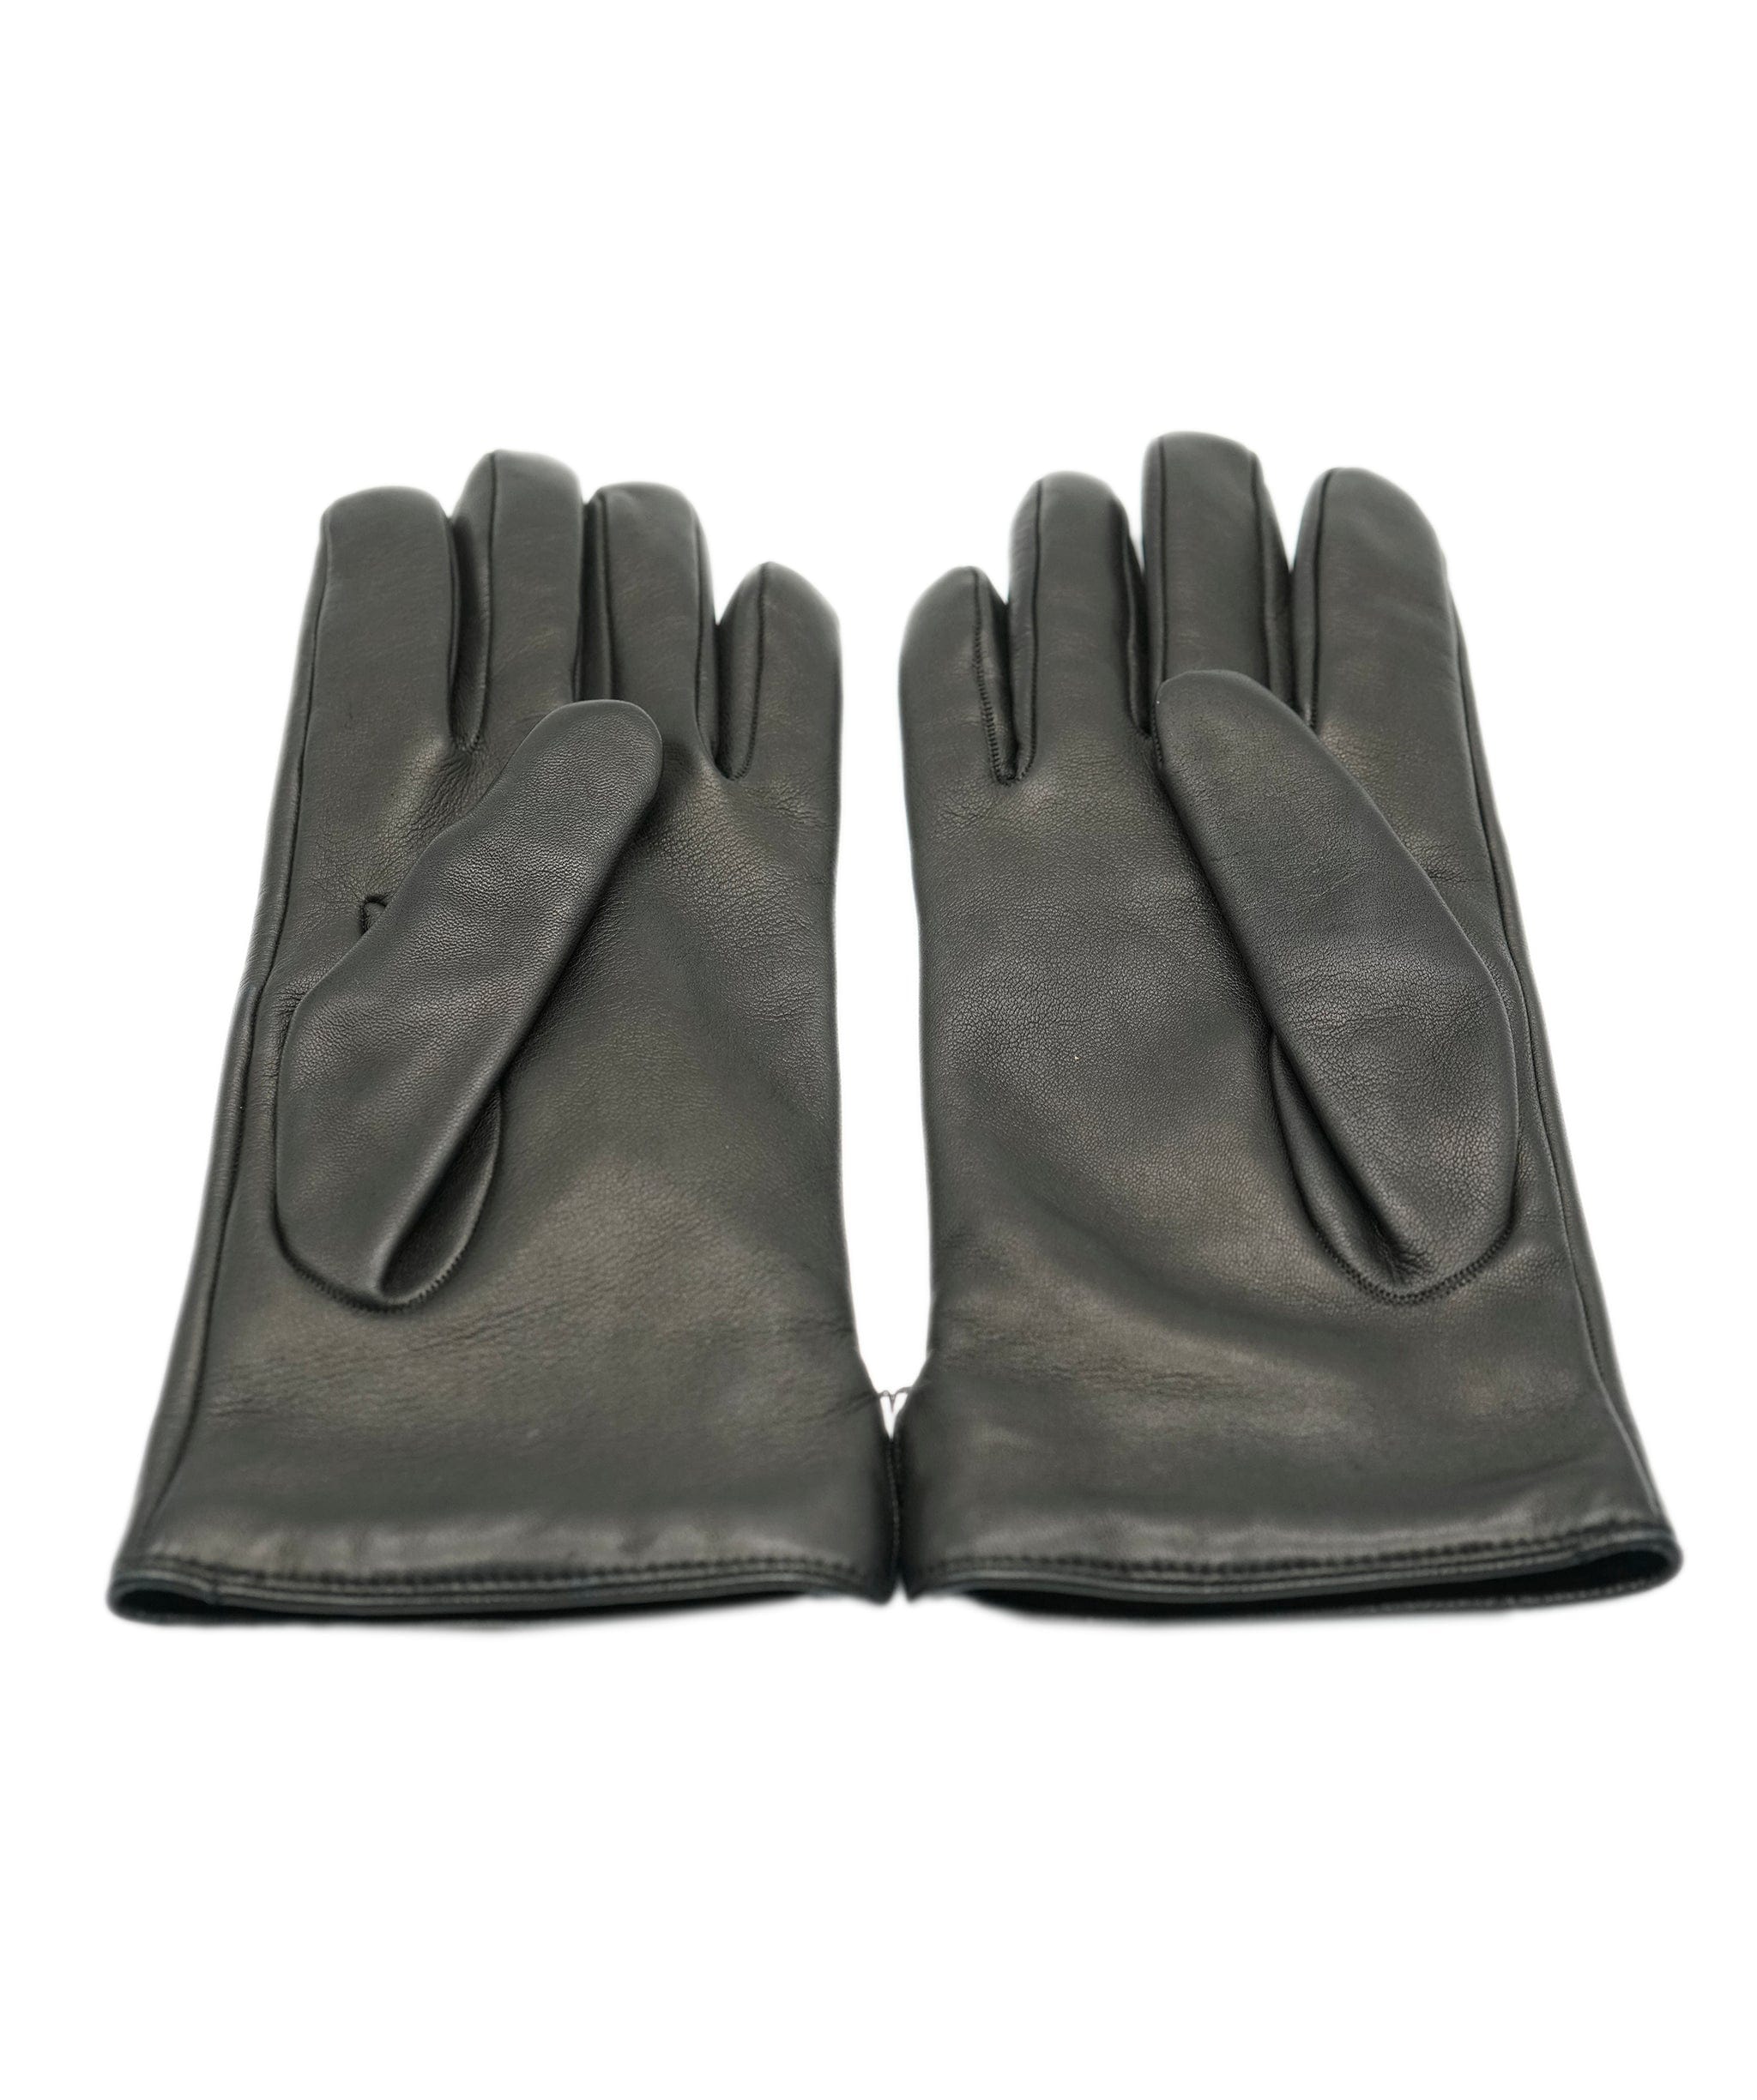 Gucci Gucci Bee leather gloves size 9+  AVL1433